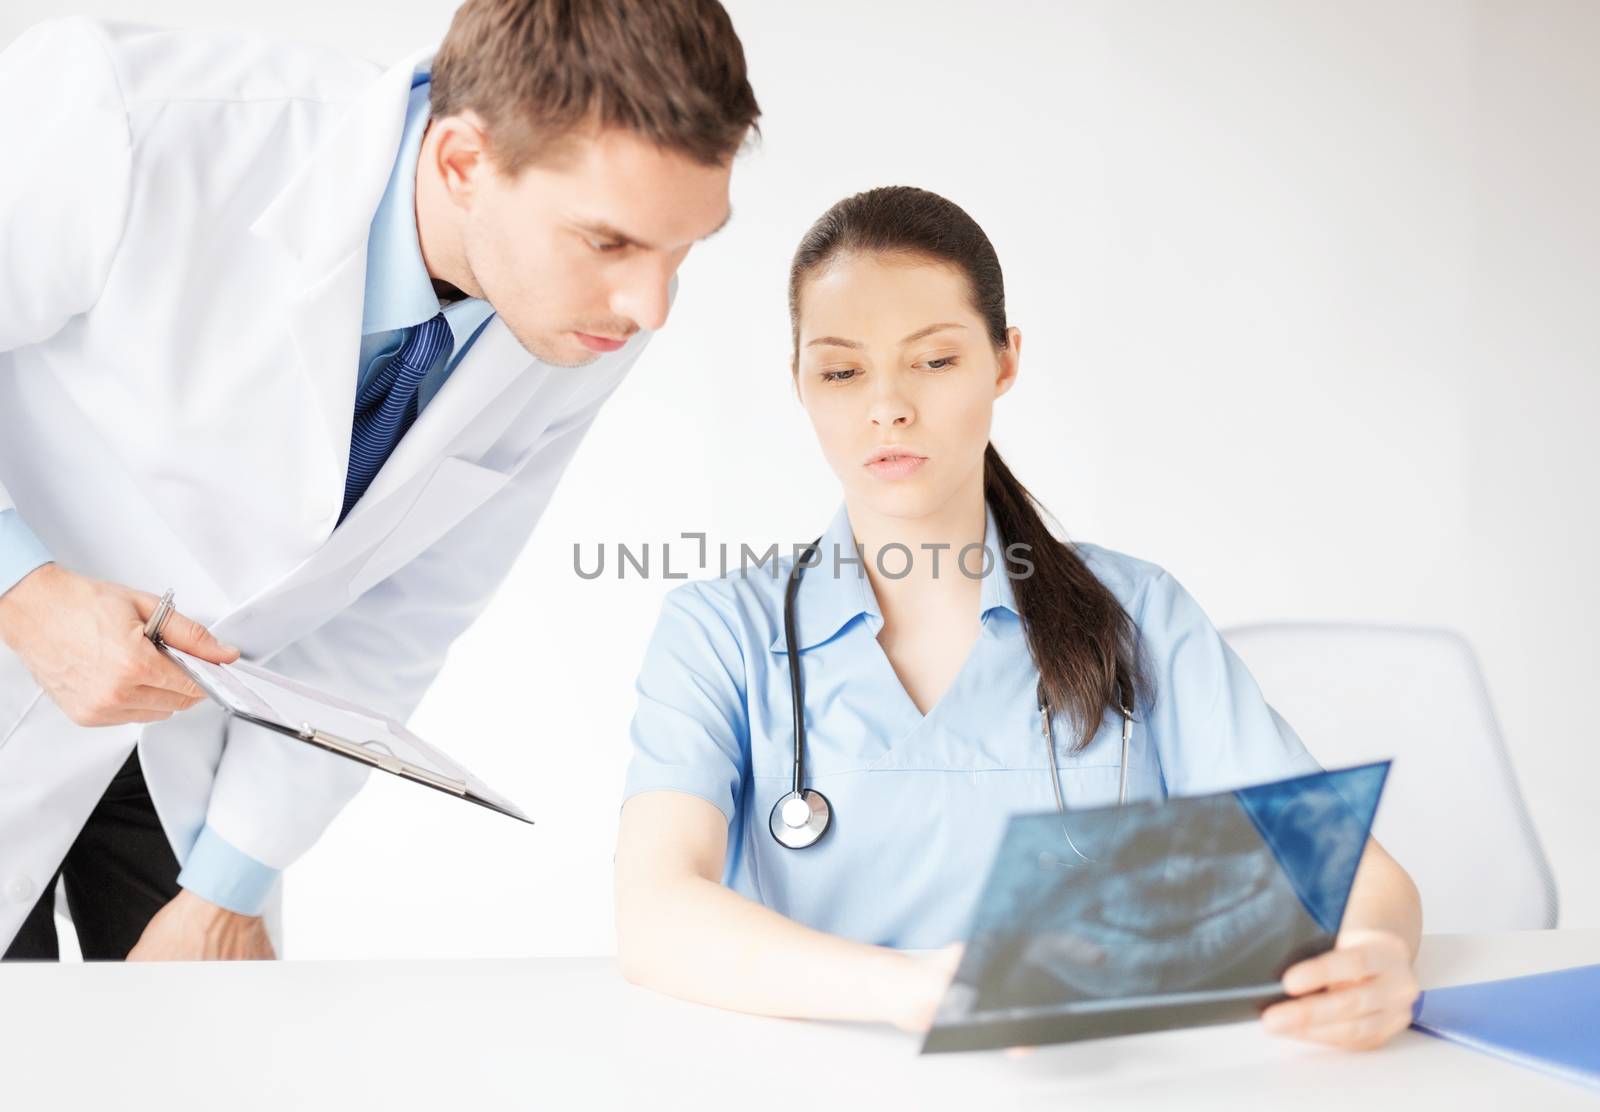 two medical workers looking at x-ray by dolgachov